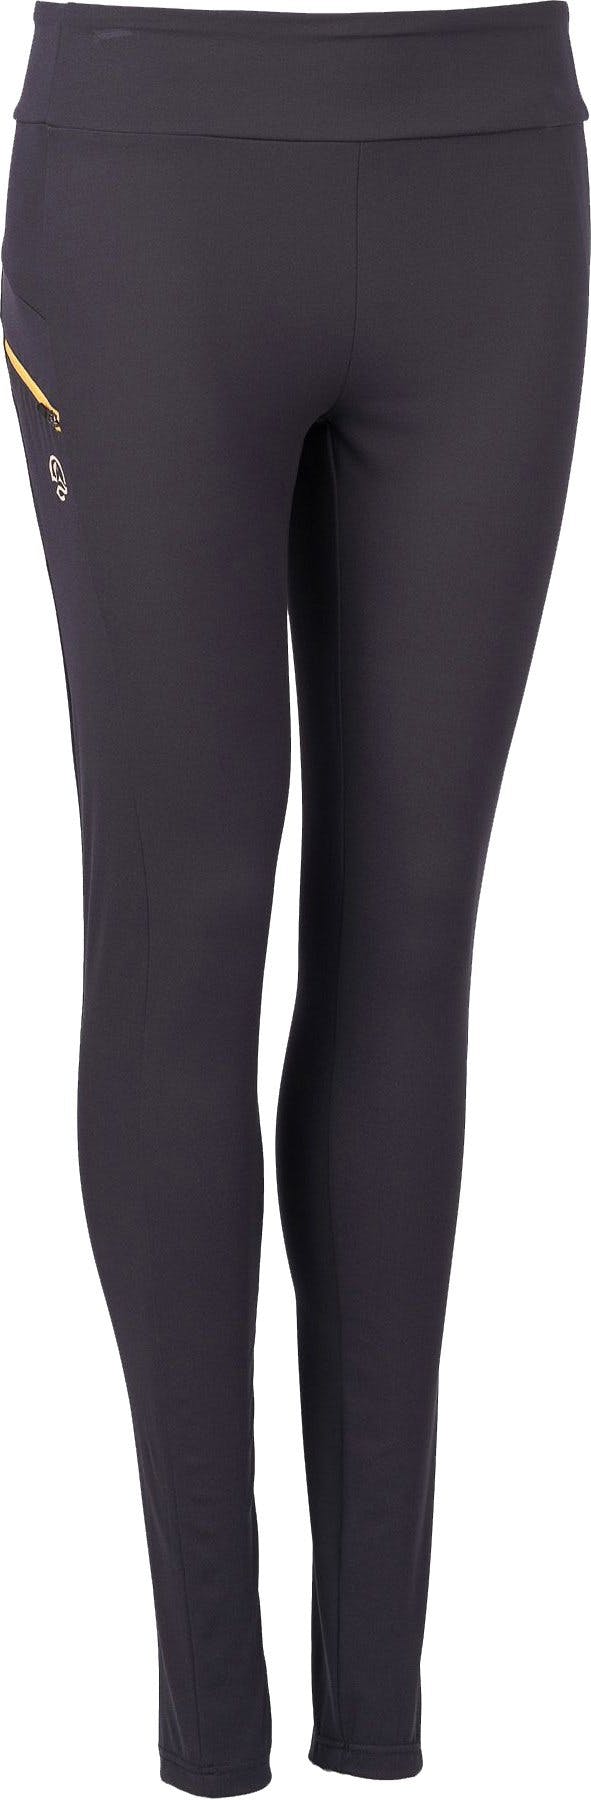 Product image for Coolsha Summer Tights - Women's